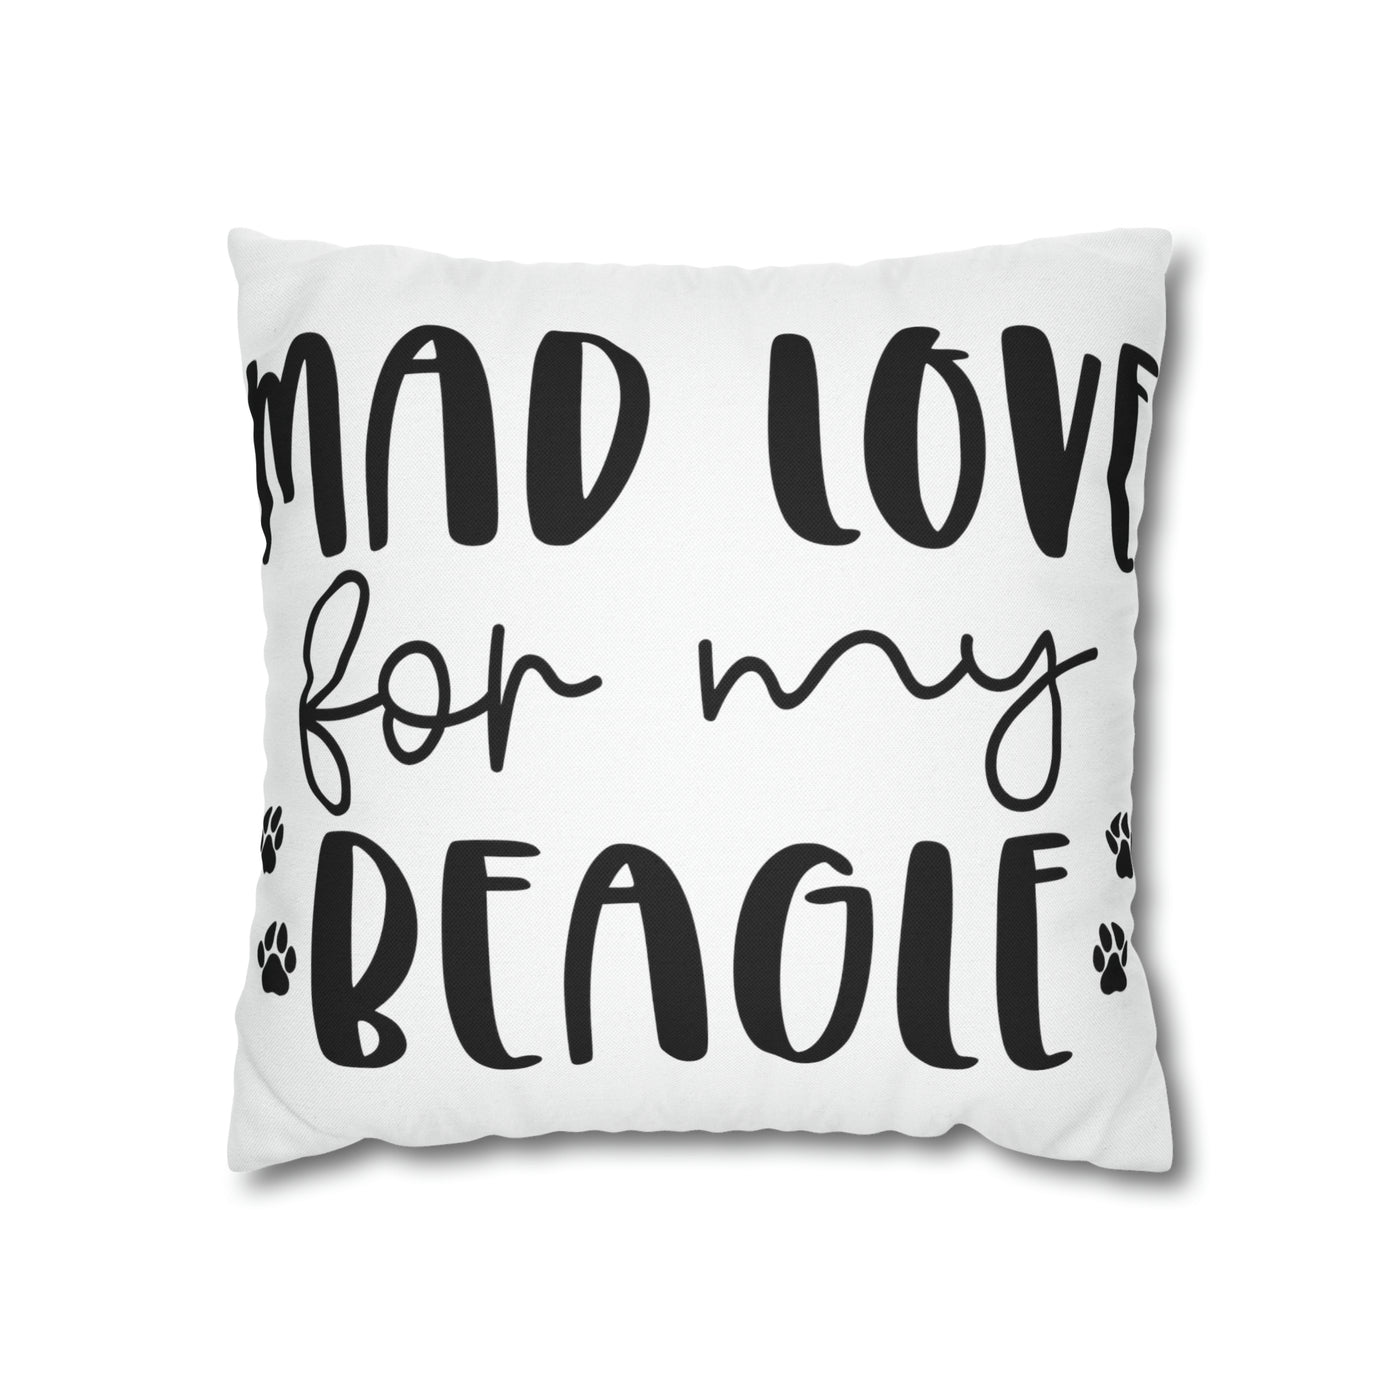 Mad Love For My Beagle Square Pillow Case